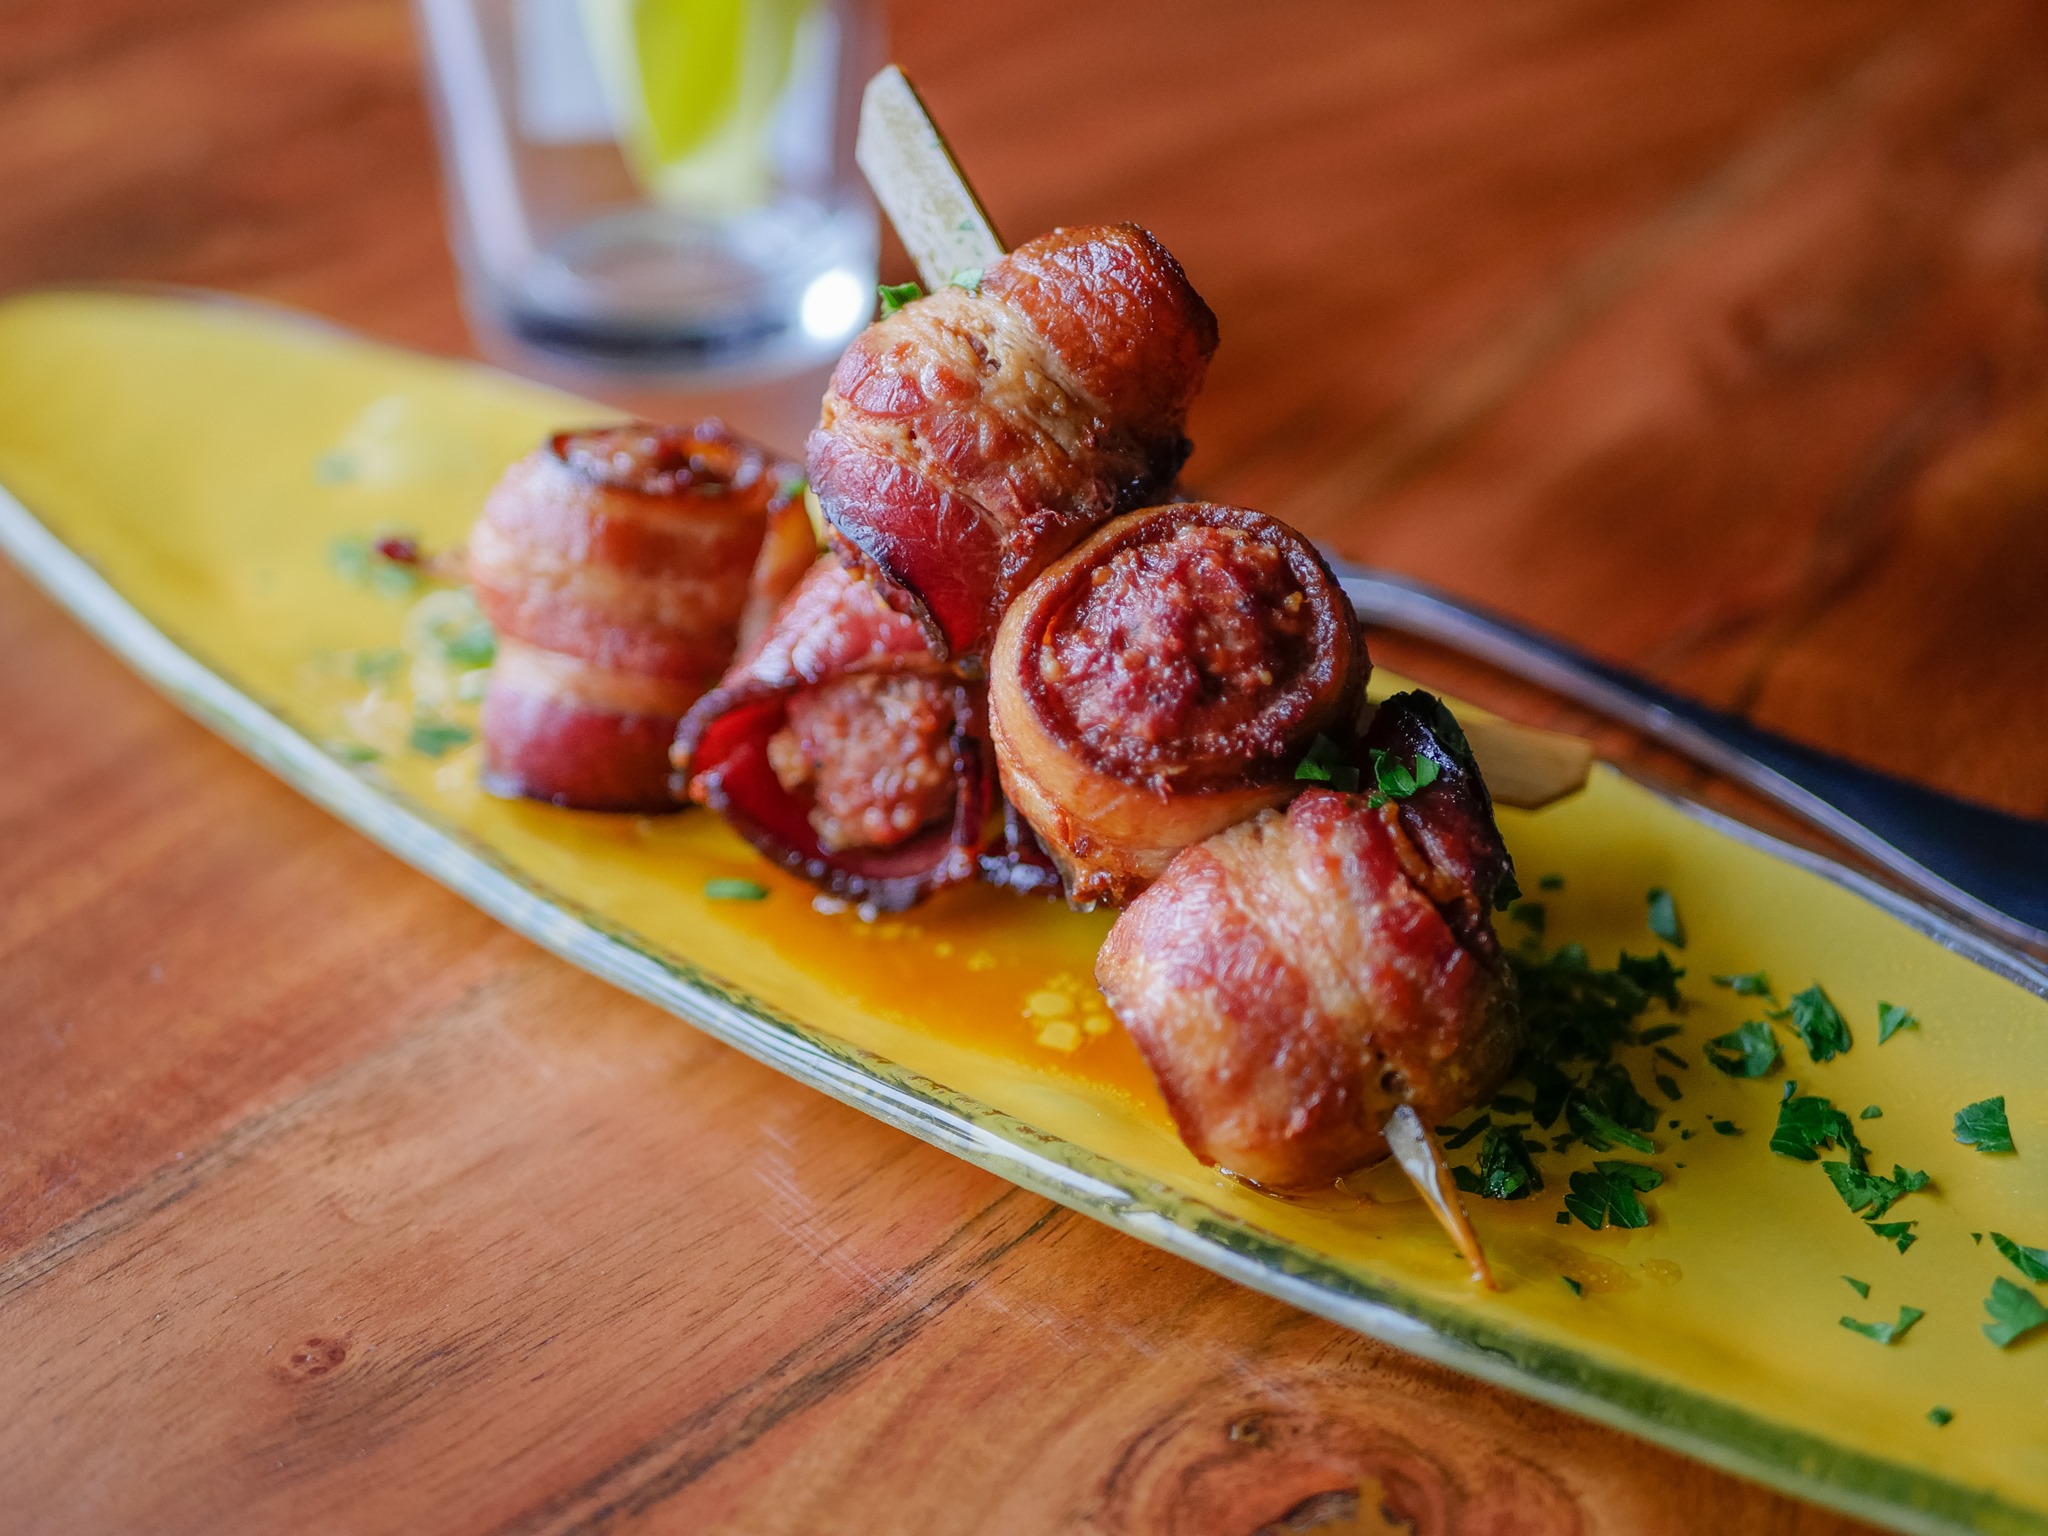 Bacon wrapped meatballs at Manic Meatball